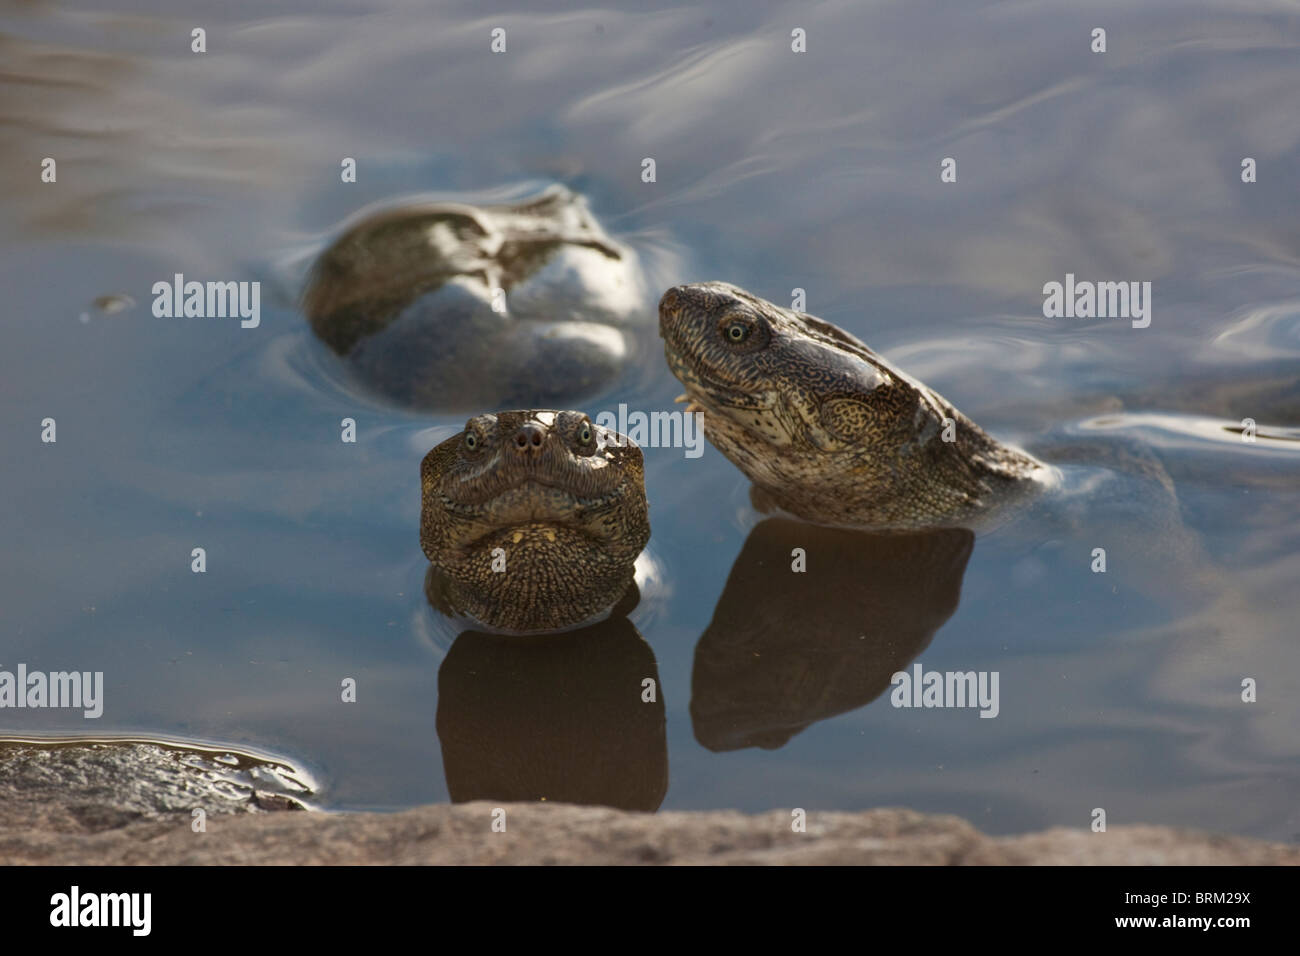 Two terrapins with their heads above water Stock Photo